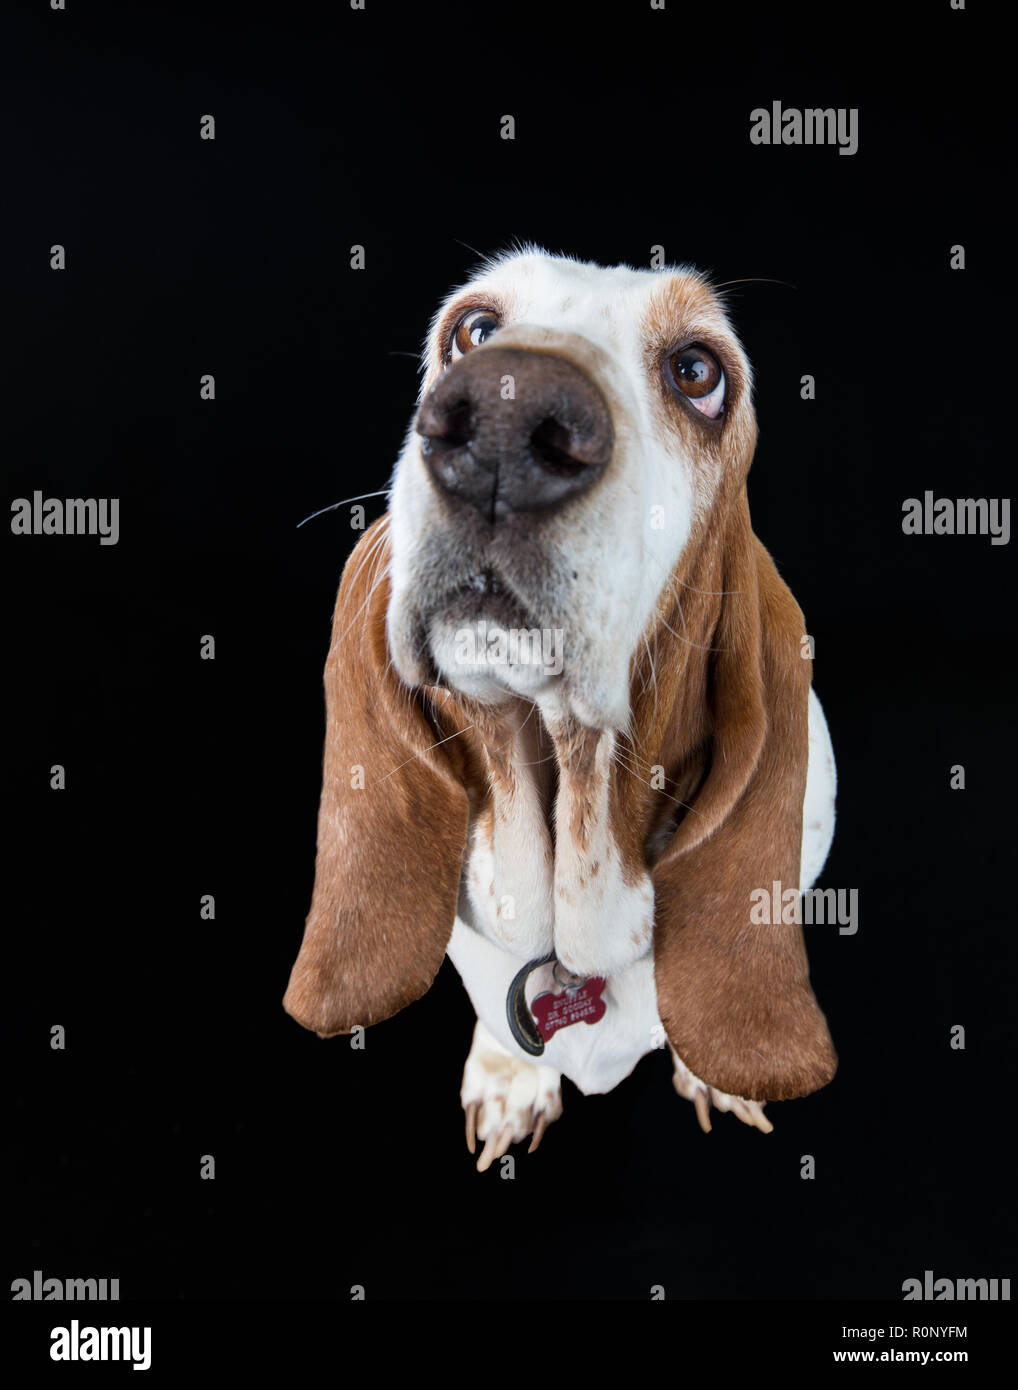 Wide-angle shot of a Basset Hound looking upwards inploringly against a dark studio background Stock Photo